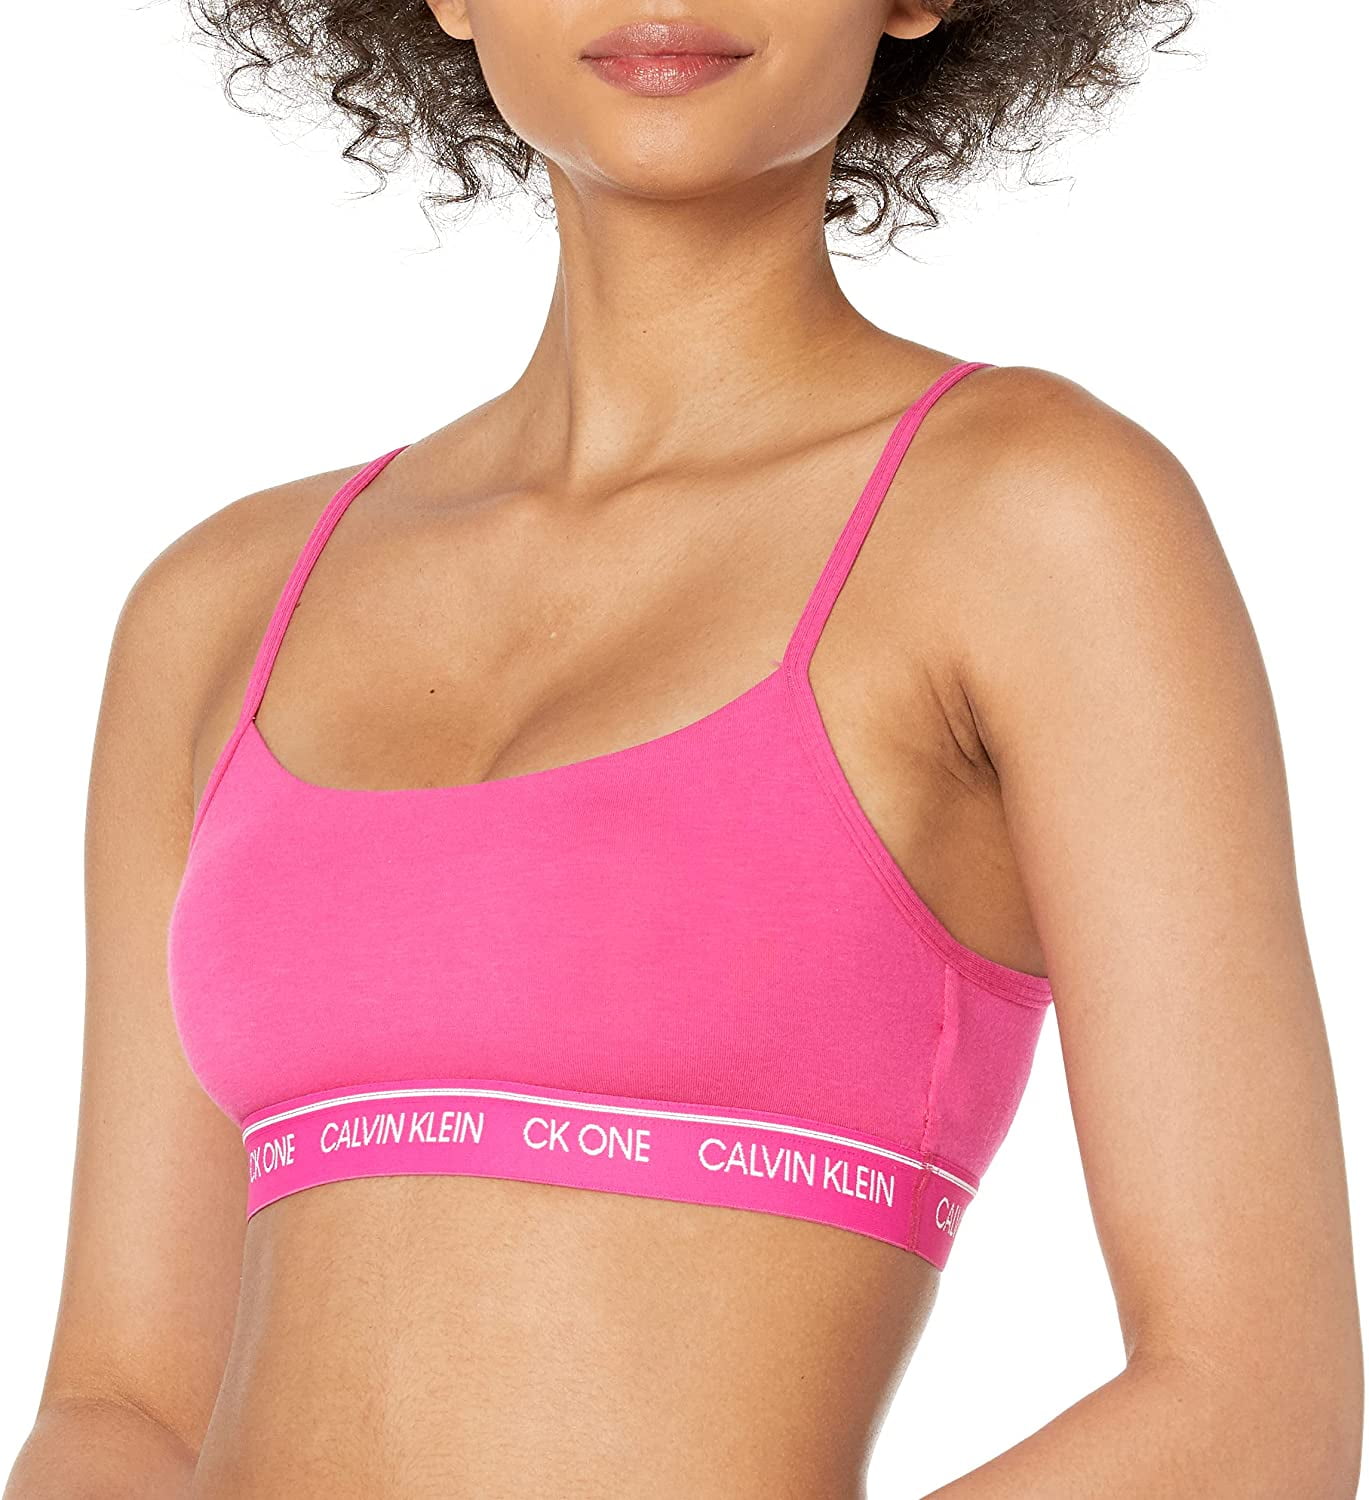 Calvin Klein Womens Ck One Cotton Unlined Bralette Large Party Pink 